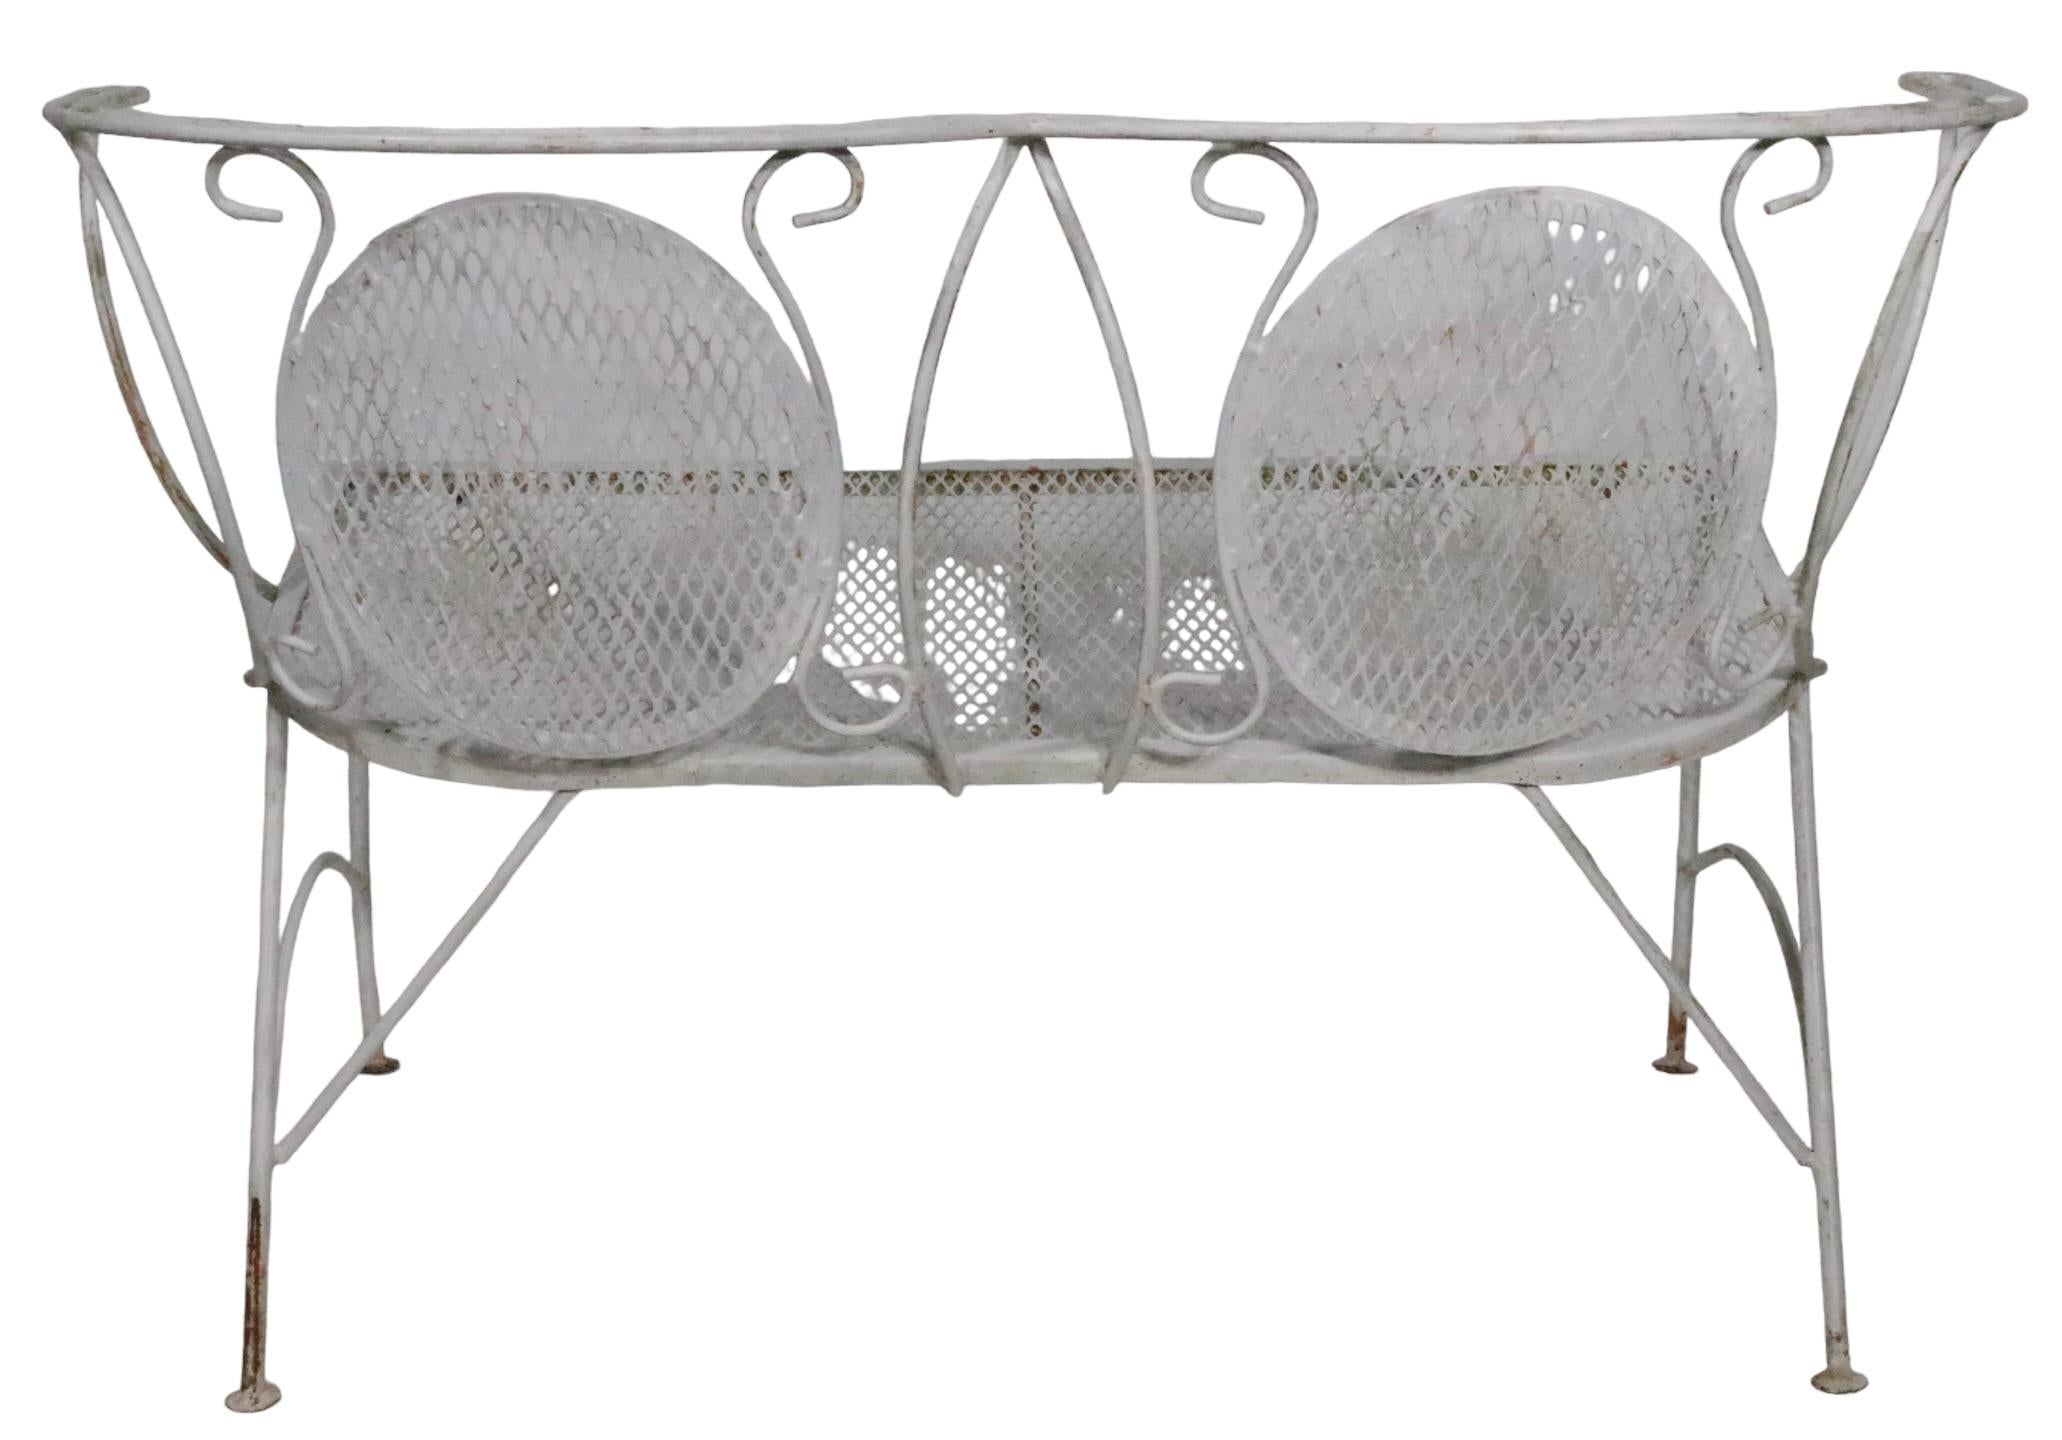 Vintage Wrought Iron Garden Patio Poolside Bench Att. to Woodard In Good Condition For Sale In New York, NY